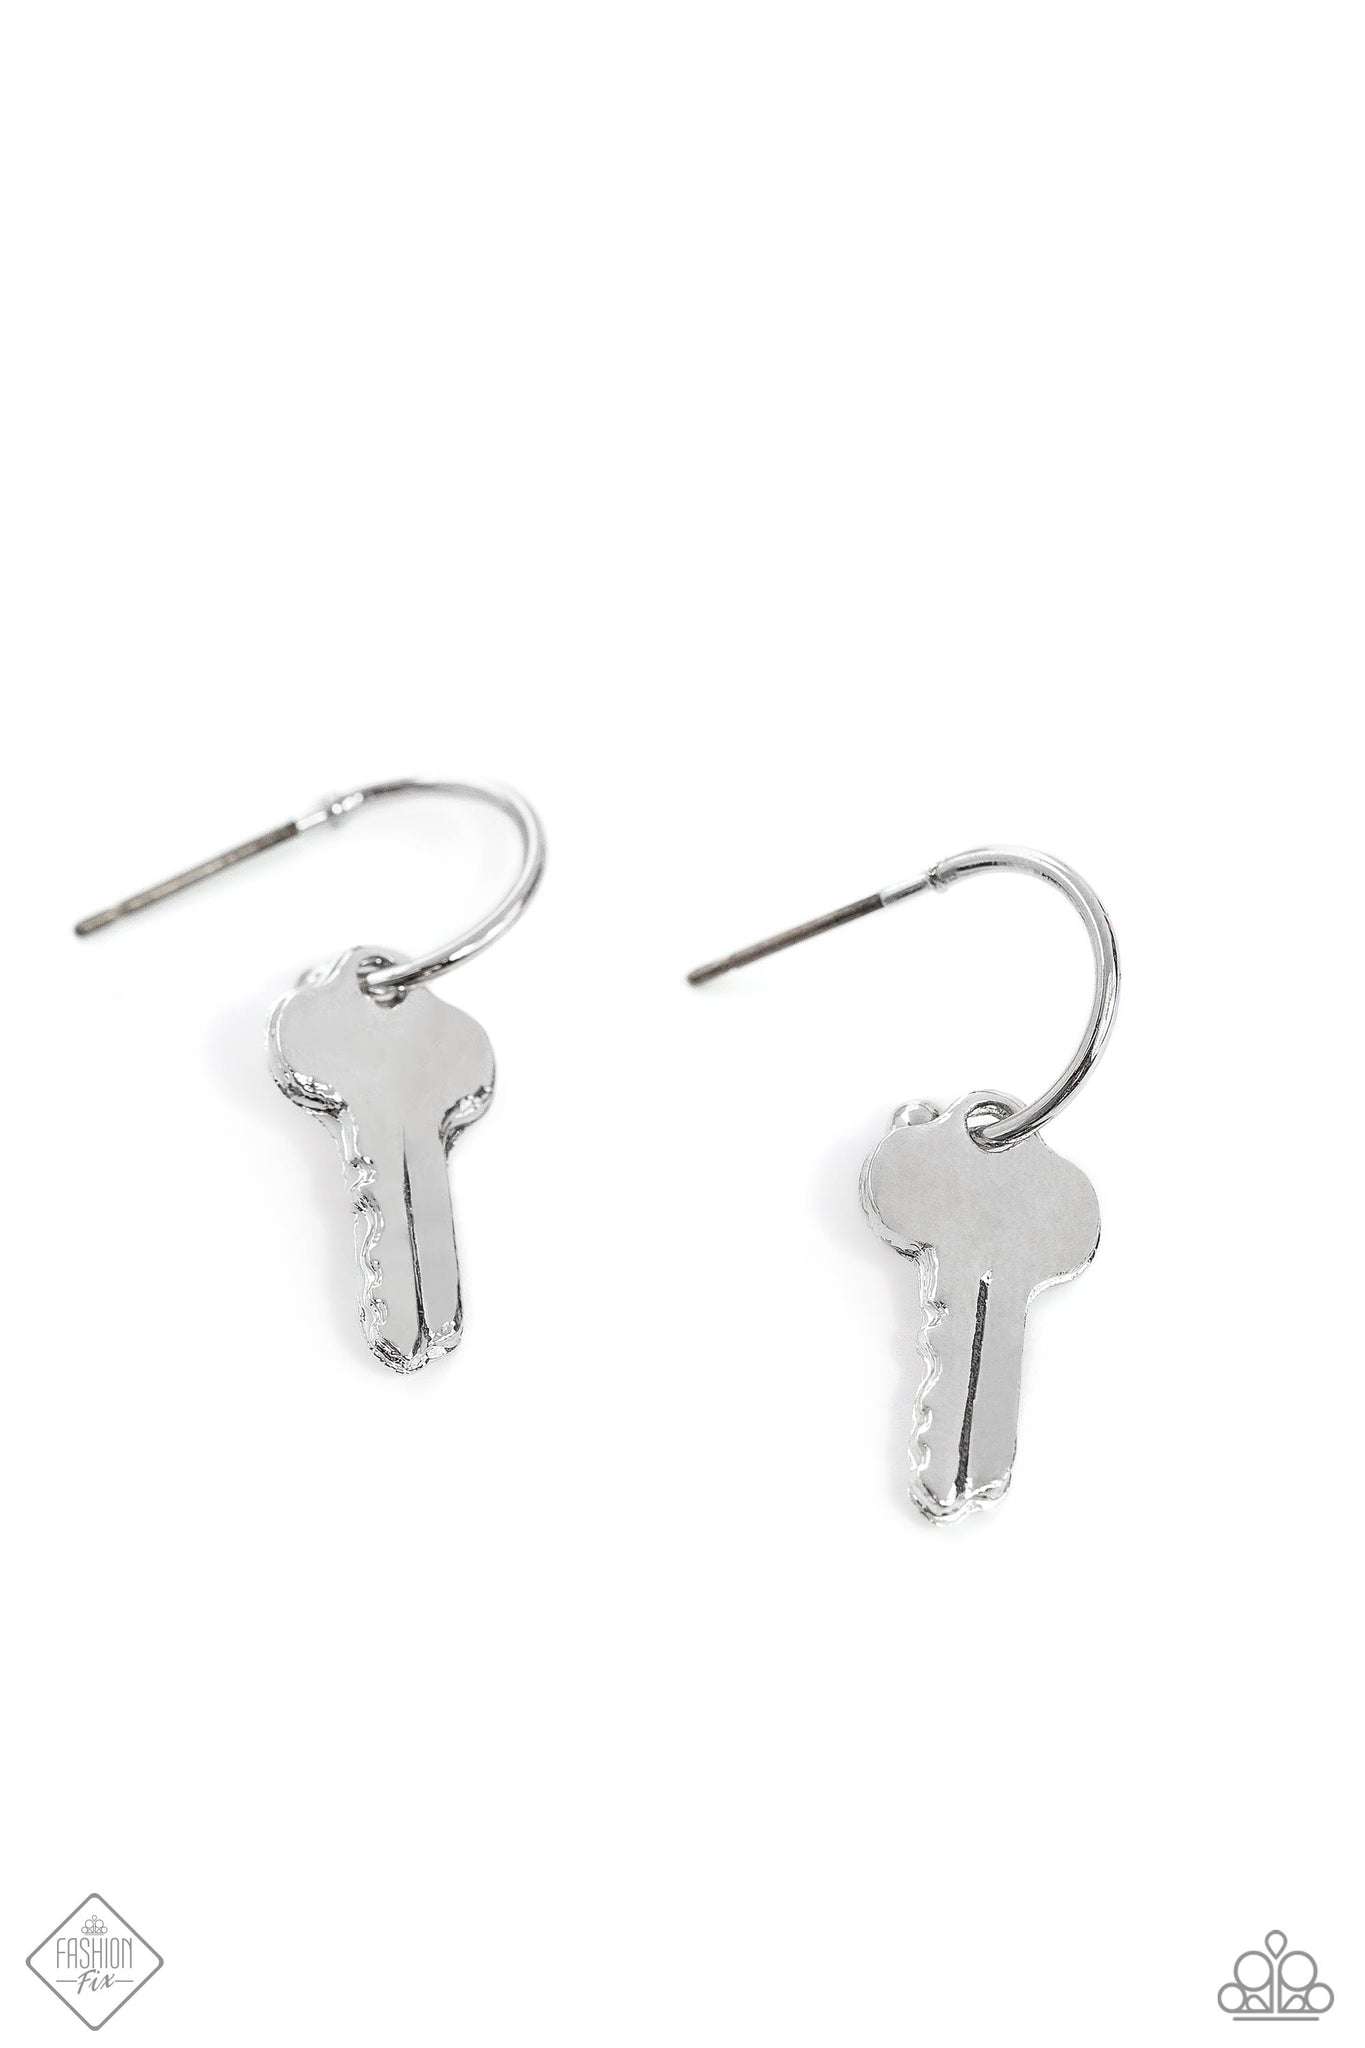 The Key to Everything Silver Earring